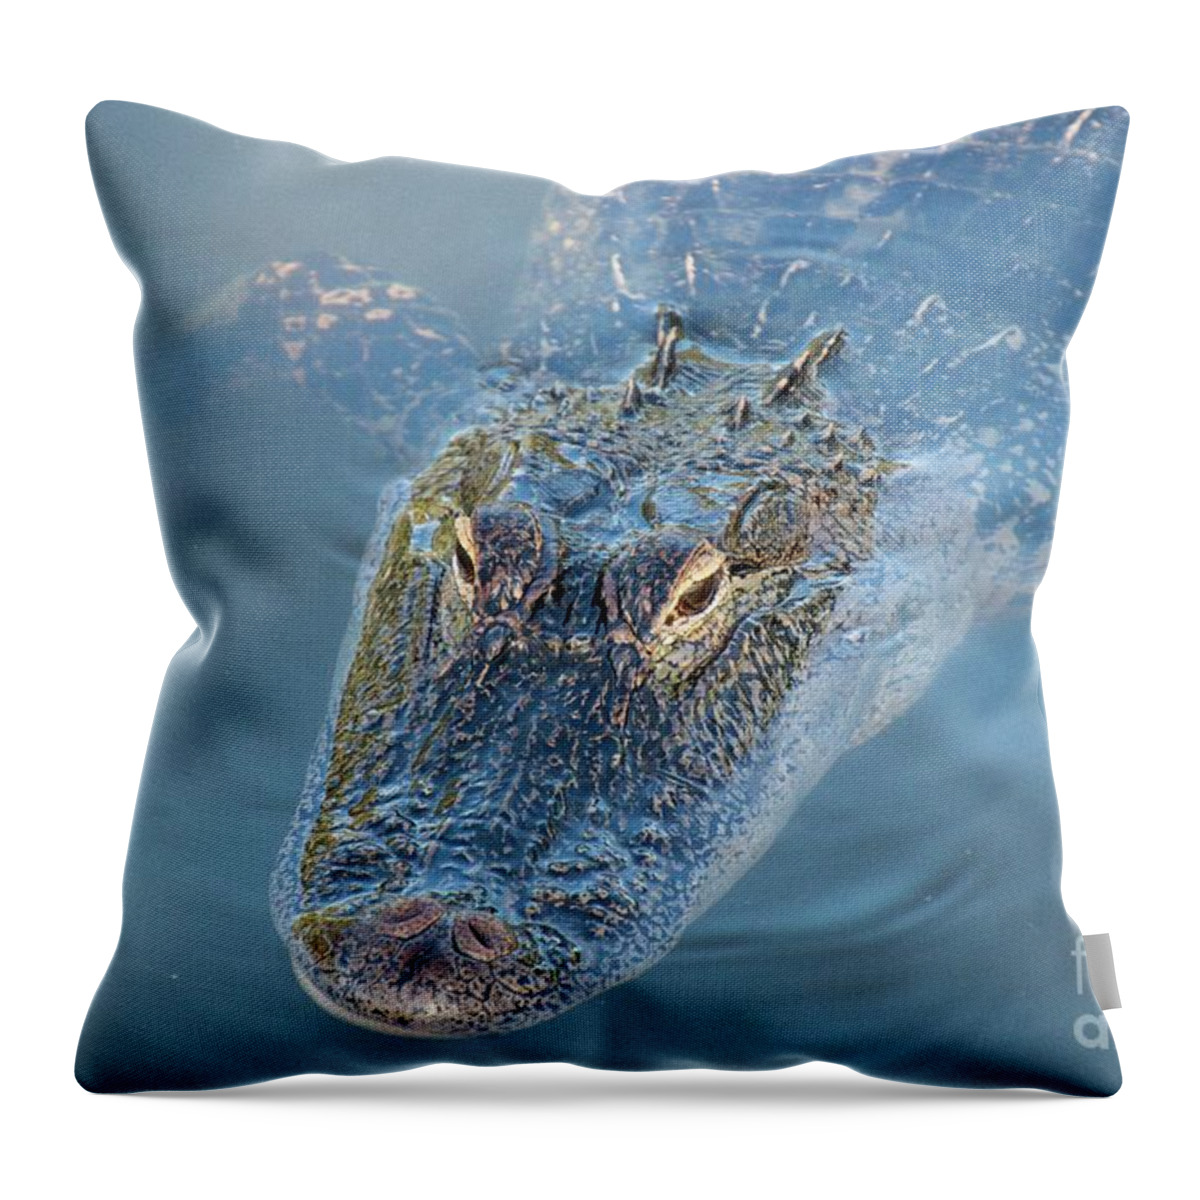  Alligator Throw Pillow featuring the photograph An Alligator With A Reflection In it's Eye by Philip And Robbie Bracco